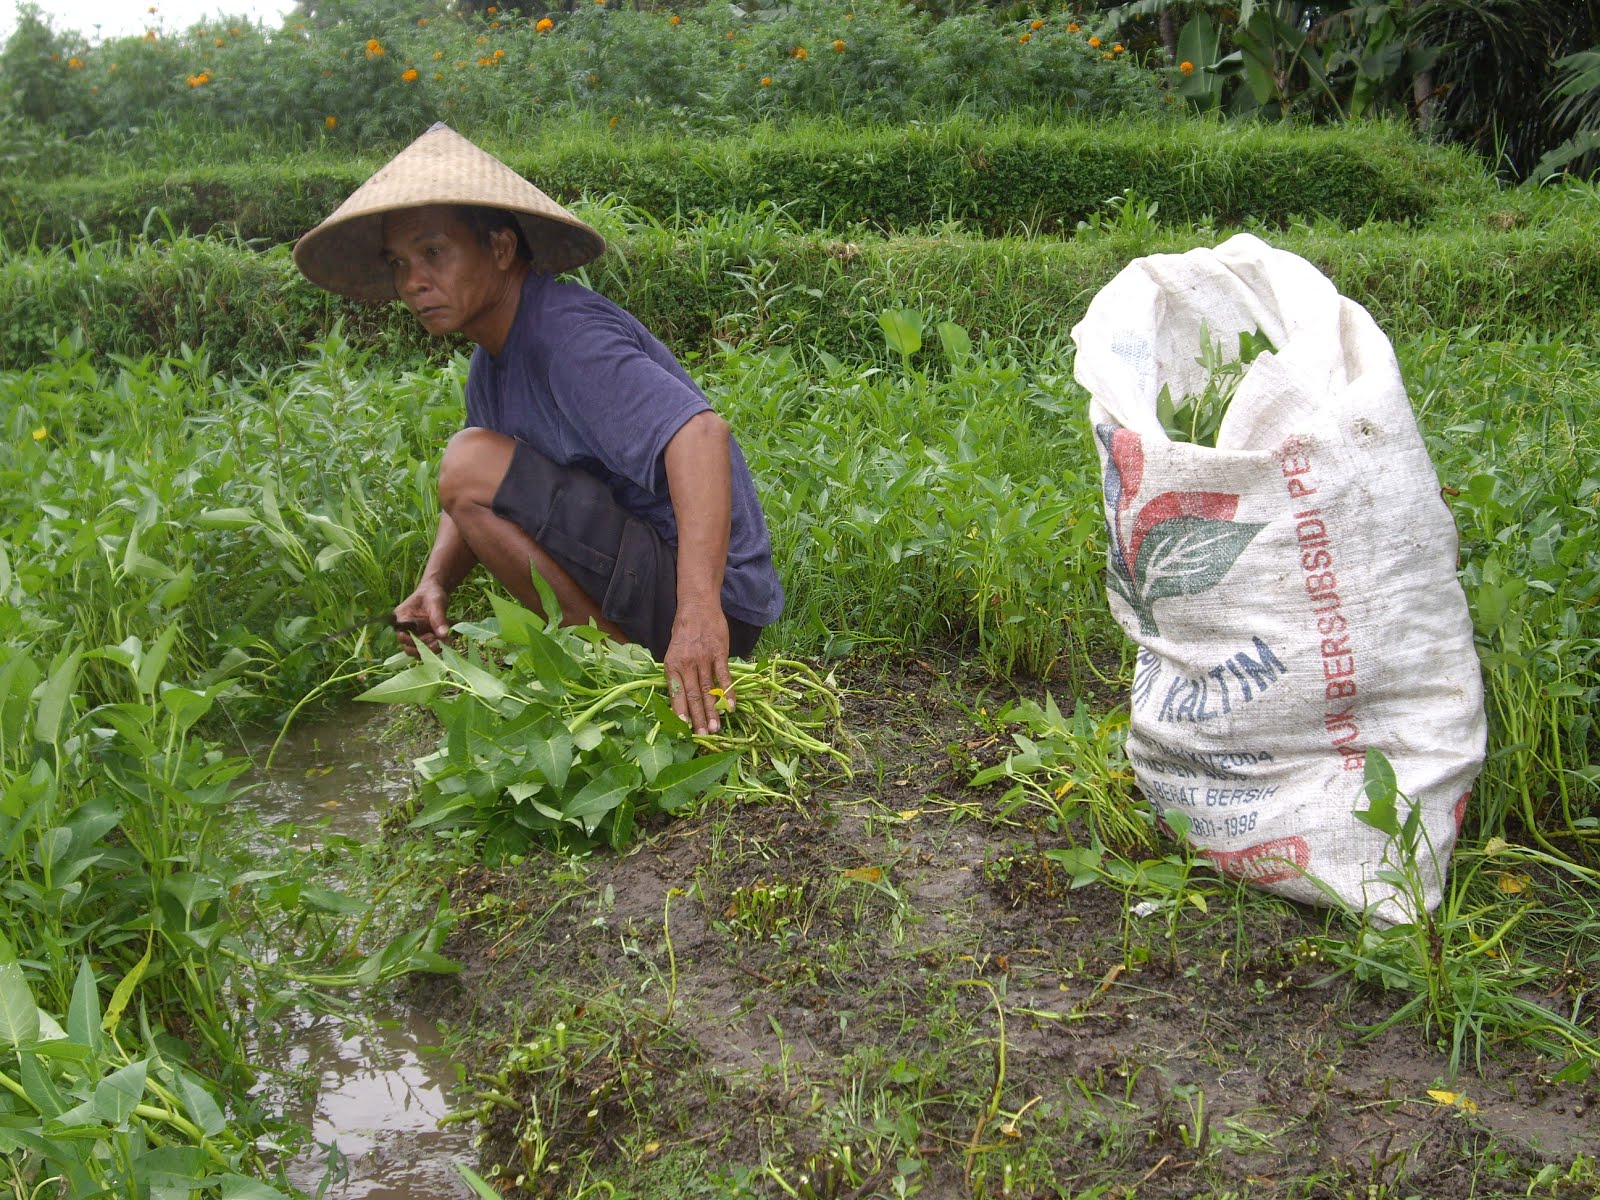 FARMER CUTS AND HARVESTS KANGKUNG LEAVES BY THE SIDE OF THE ROAD